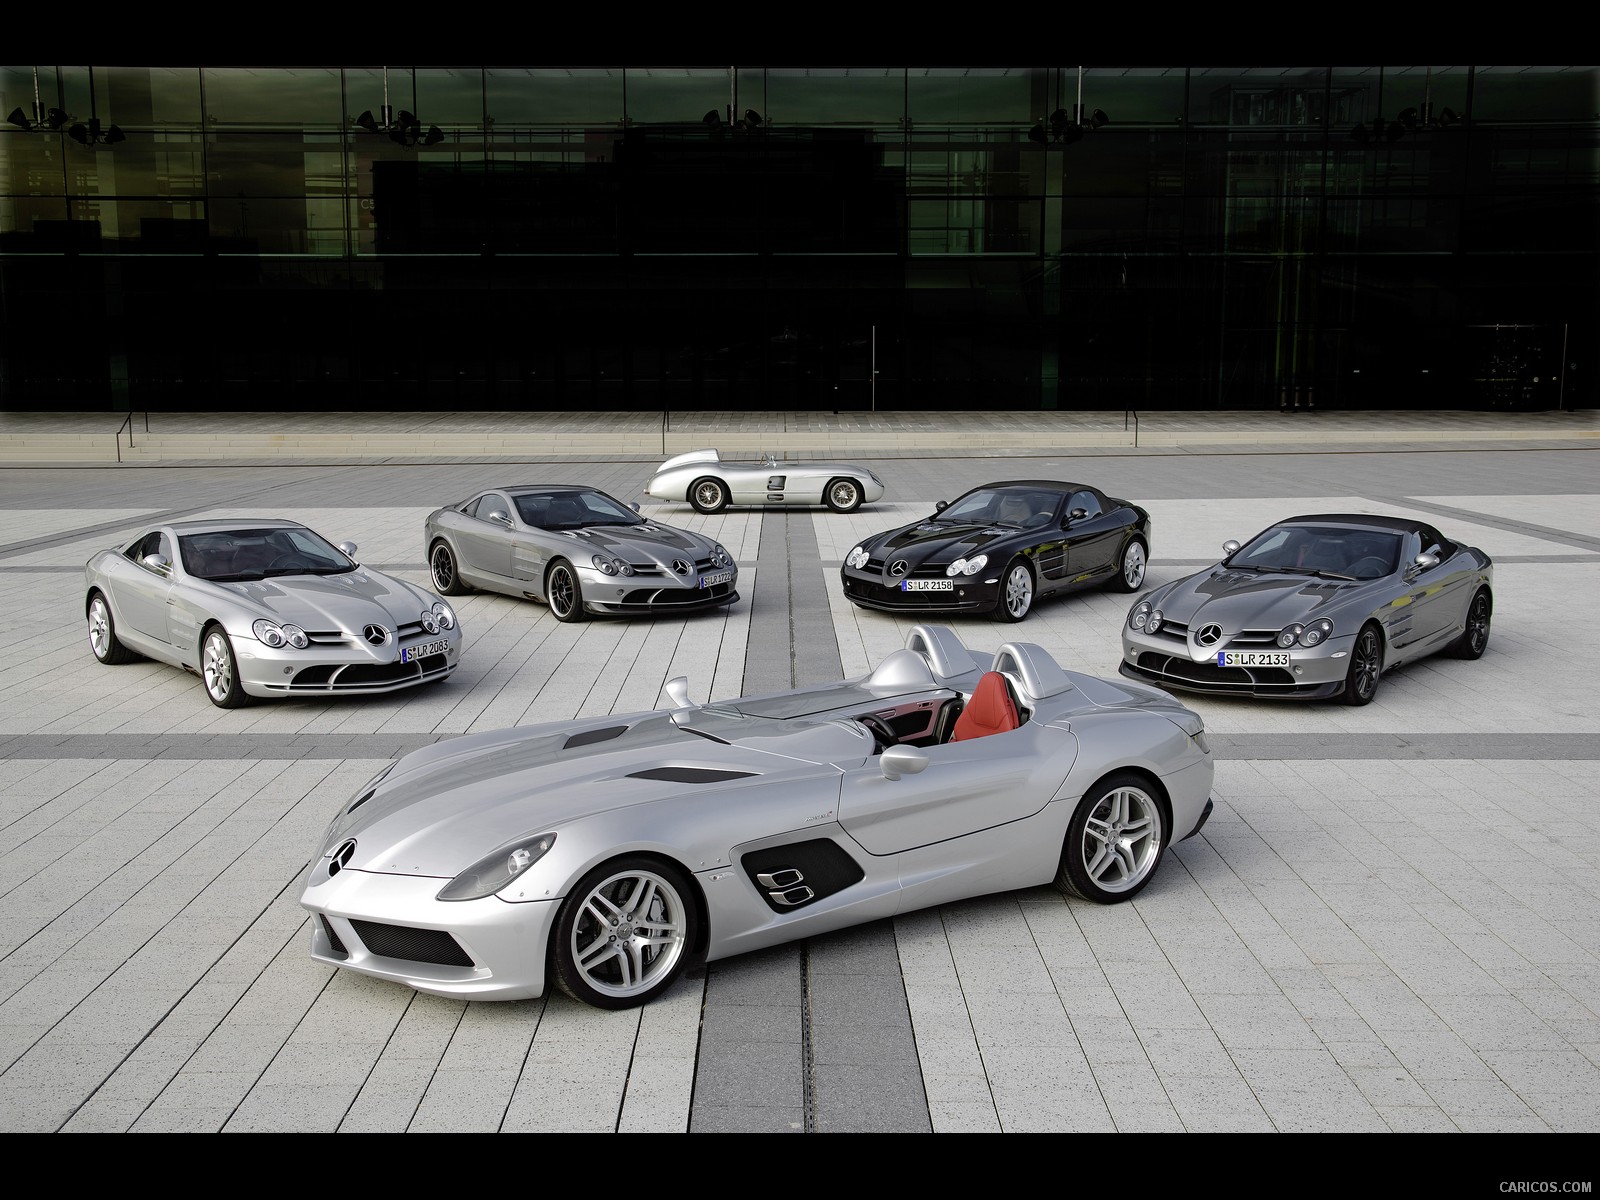 Mercedes-Benz SLR Stirling Moss and MB Lineup - , #52 of 54